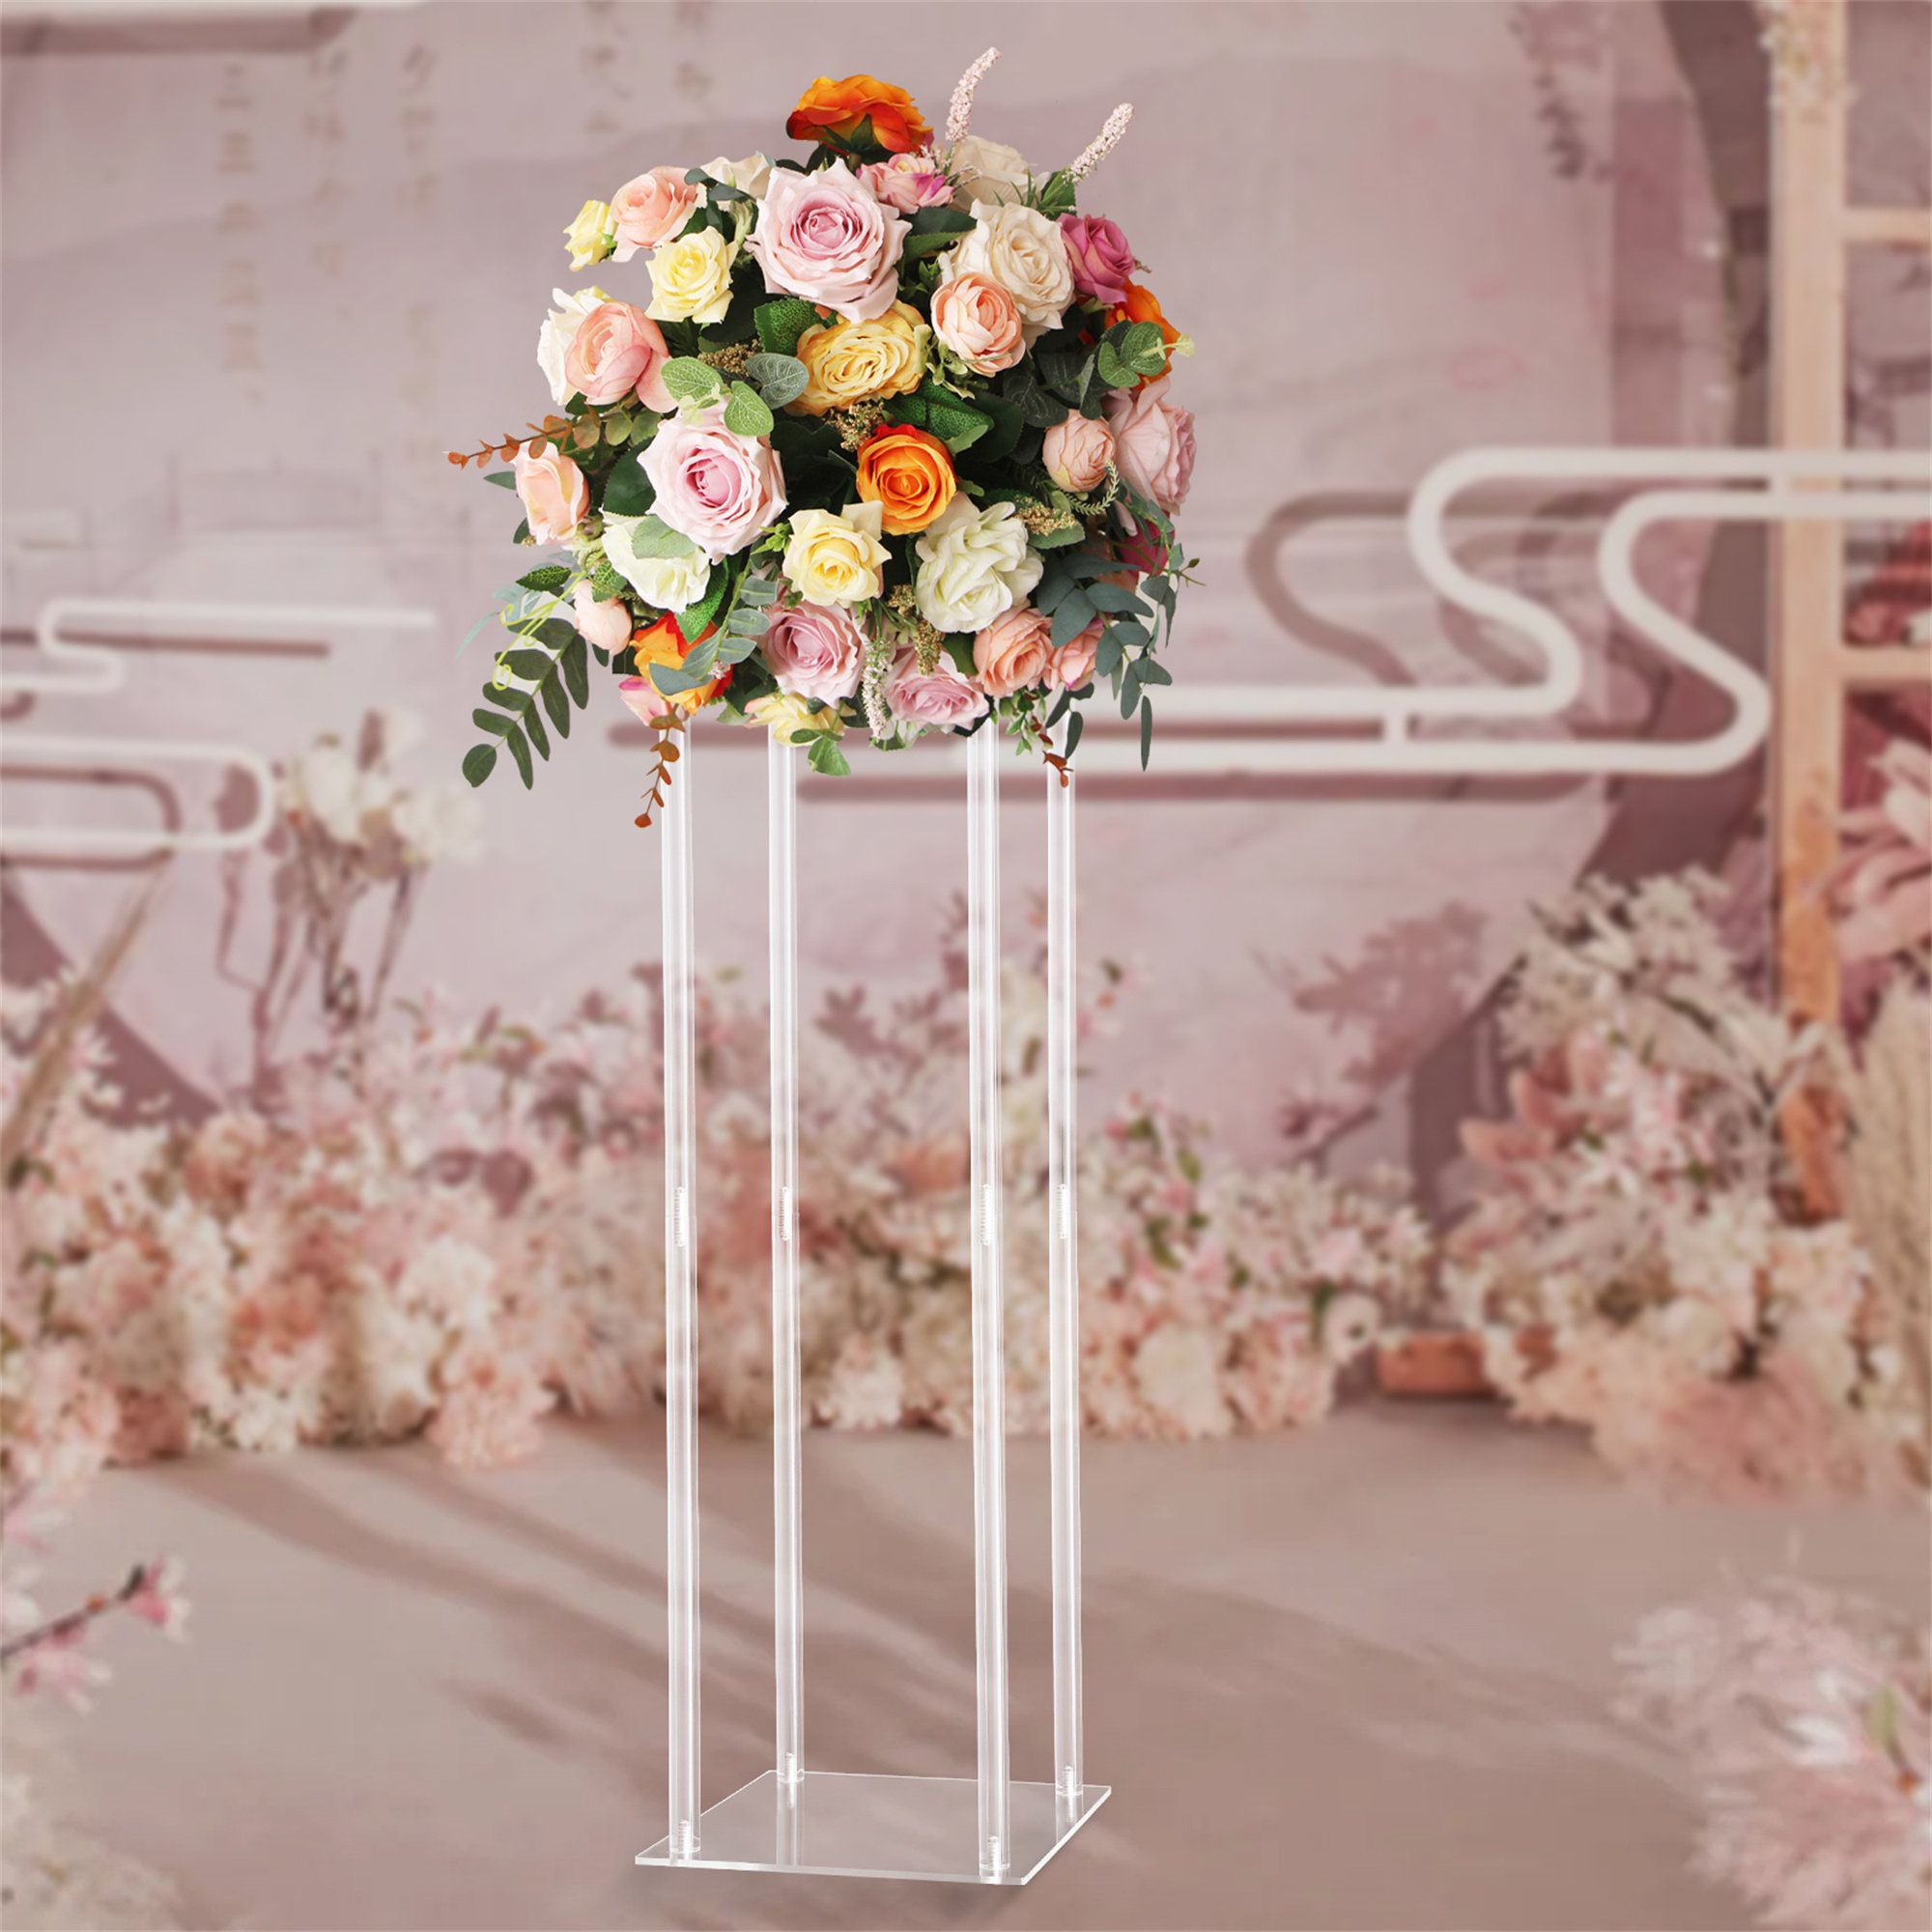 Funten 31 Inch Clear Acrylic Flower Stand Rectangular Post Center  Decoration | Wayfair With 31 Inch Plant Stands (View 15 of 15)